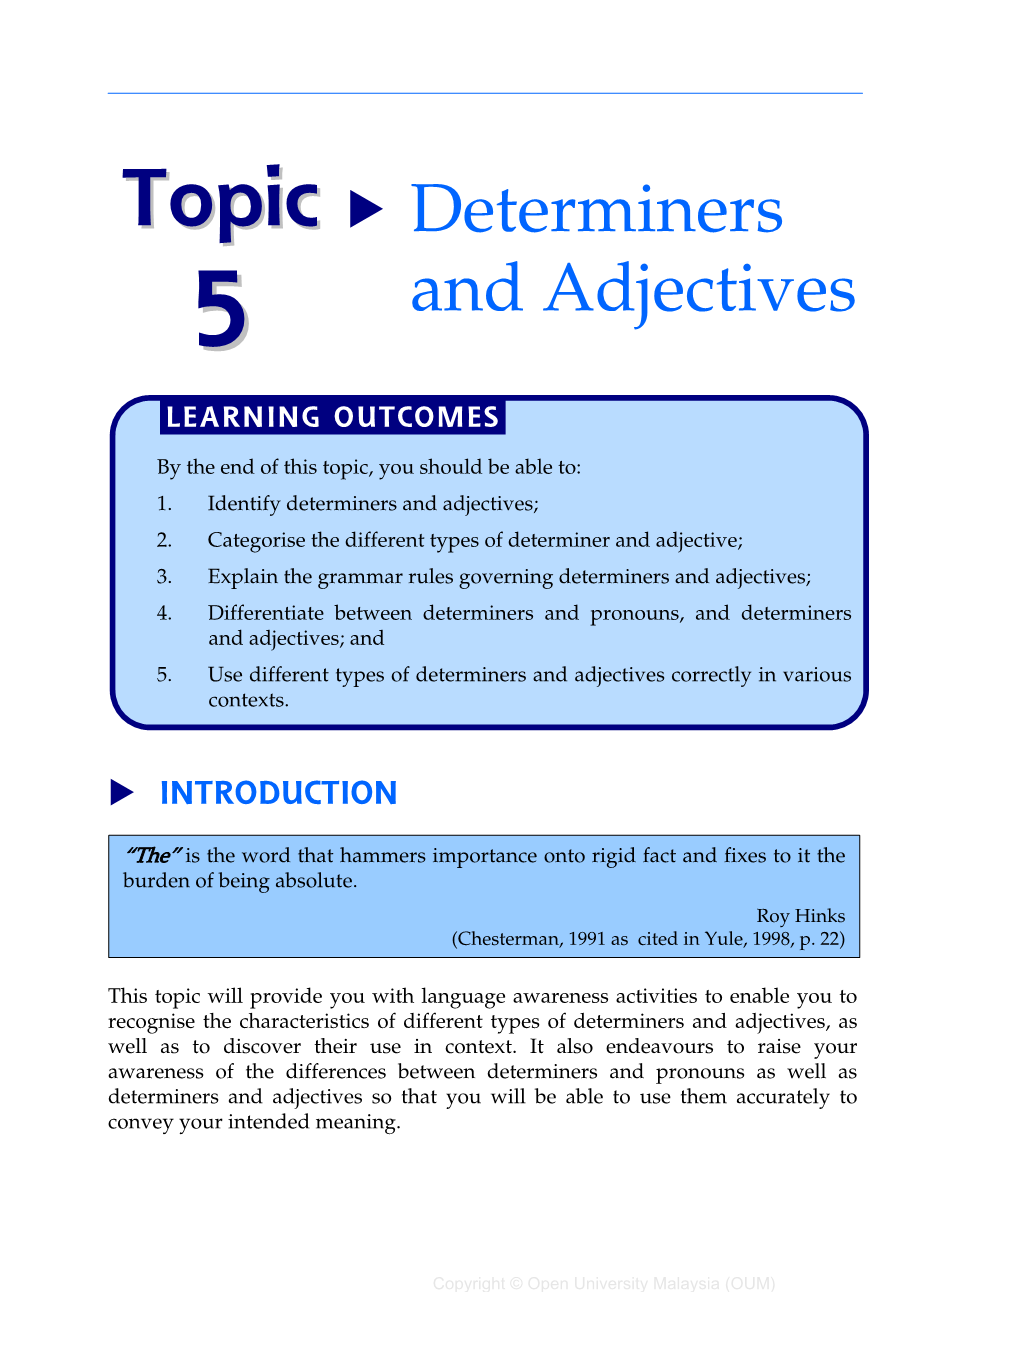 Determiners and Adjectives;